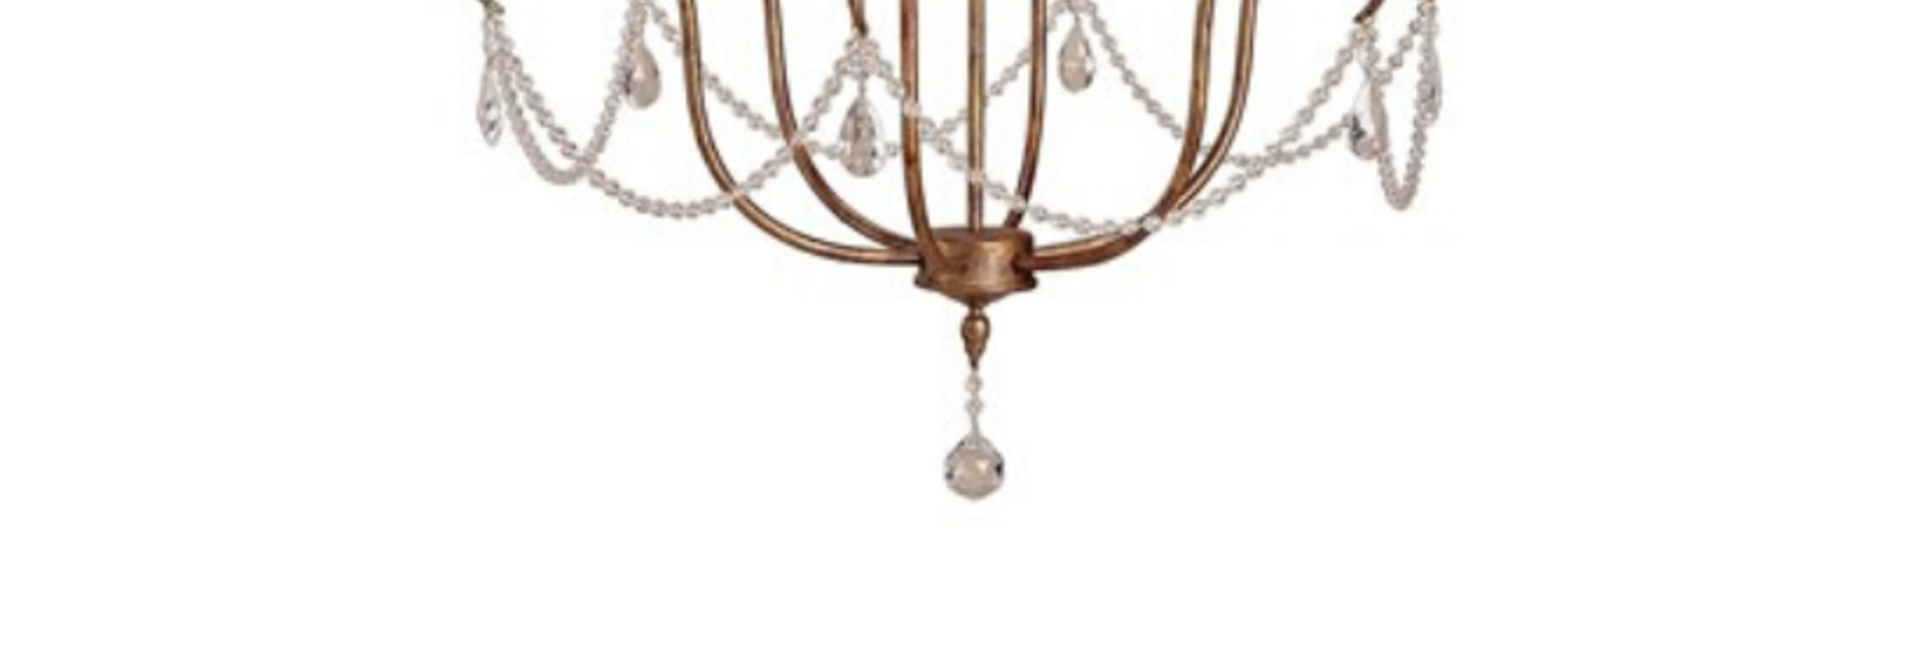 Crystal Lights | The Chandelier Collection